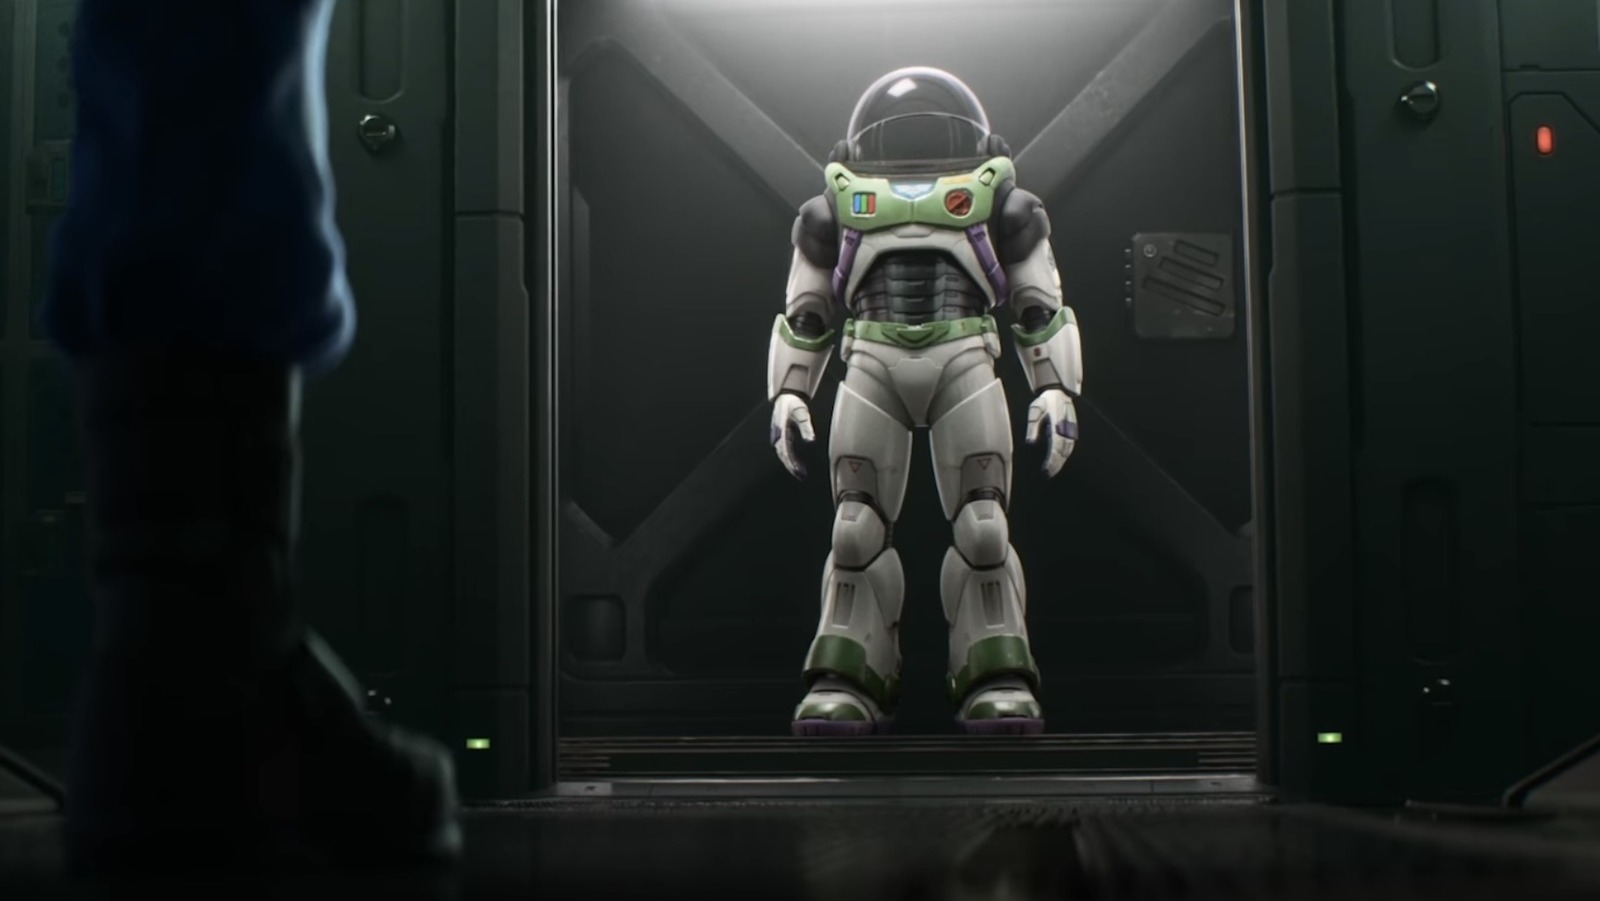 Lightyear Trailer: Buzz Lightyear (The 'Real' One) Goes To